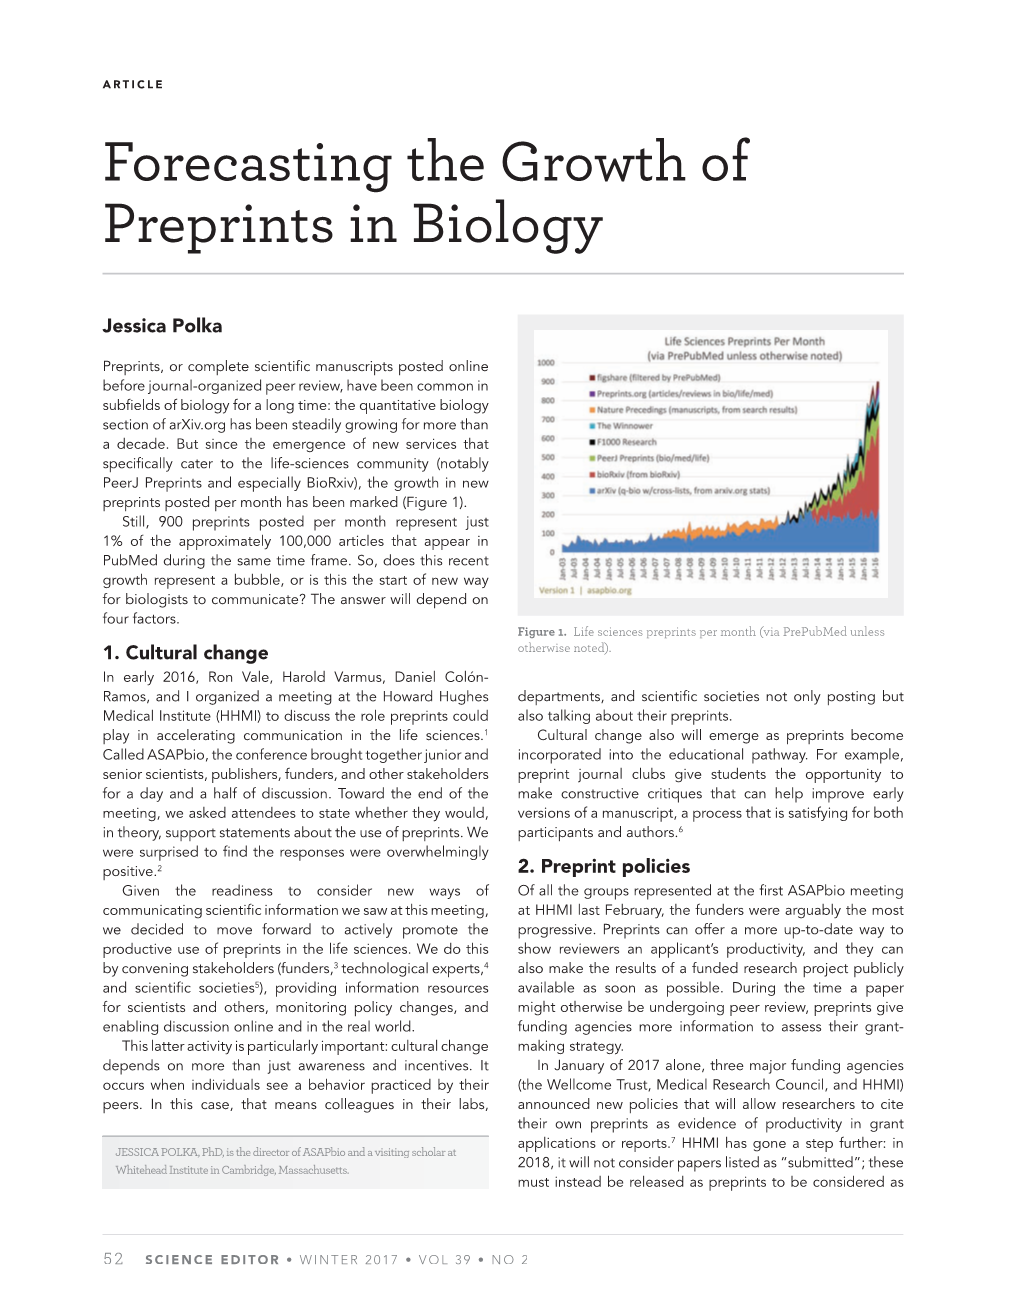 Forecasting the Growth of Preprints in Biology